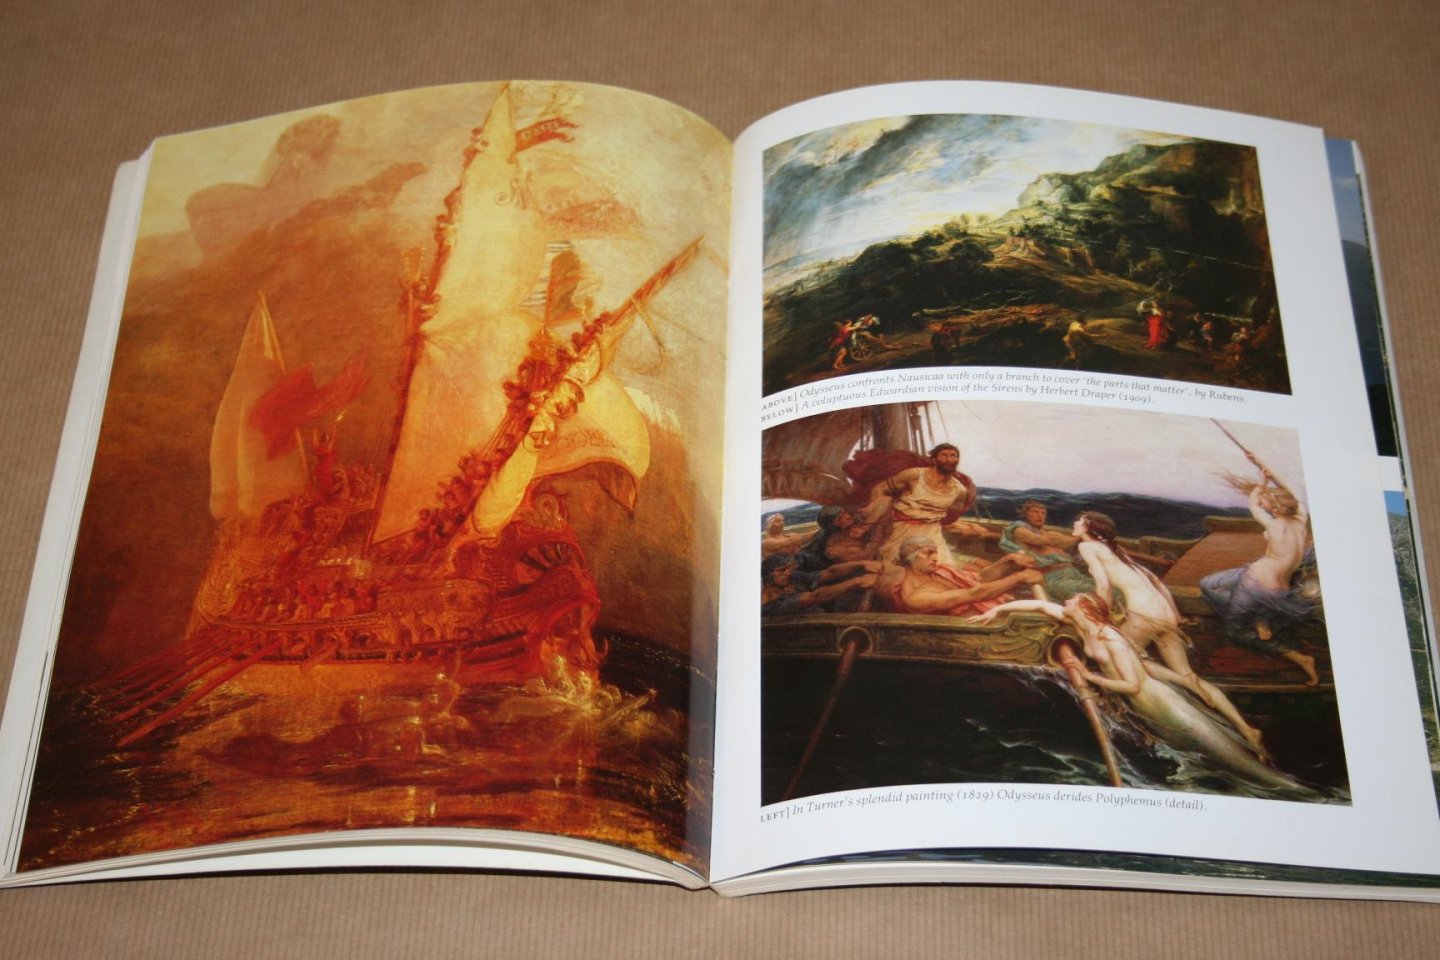 Rubens & Taplin - An Odyssey round Odysseus  -- The man & his history traced through time & place